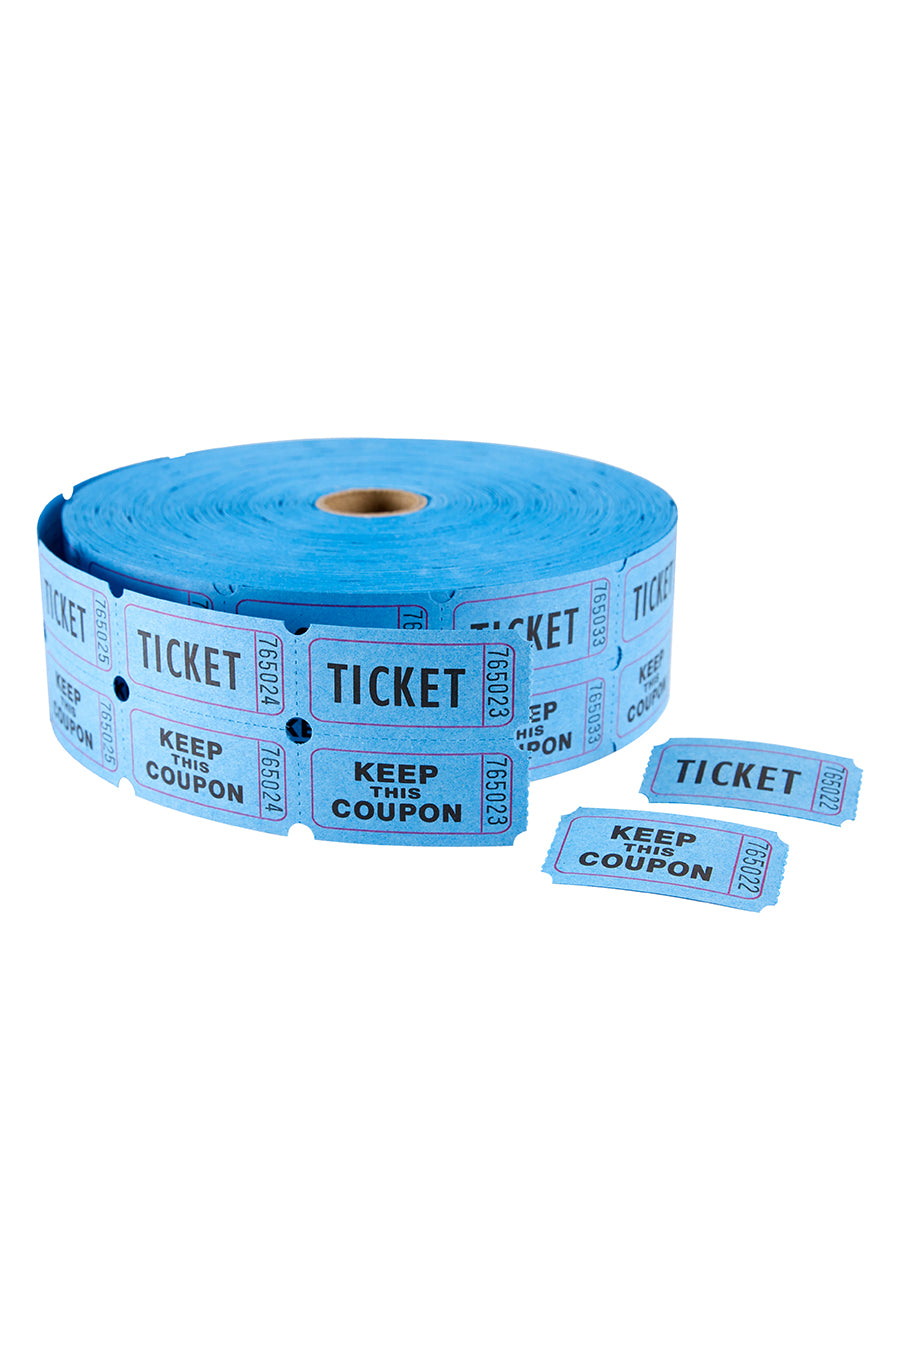 Double Ticket Roll, "Ticket/Keep This Coupon", Blue, 2000 Tickets/Roll